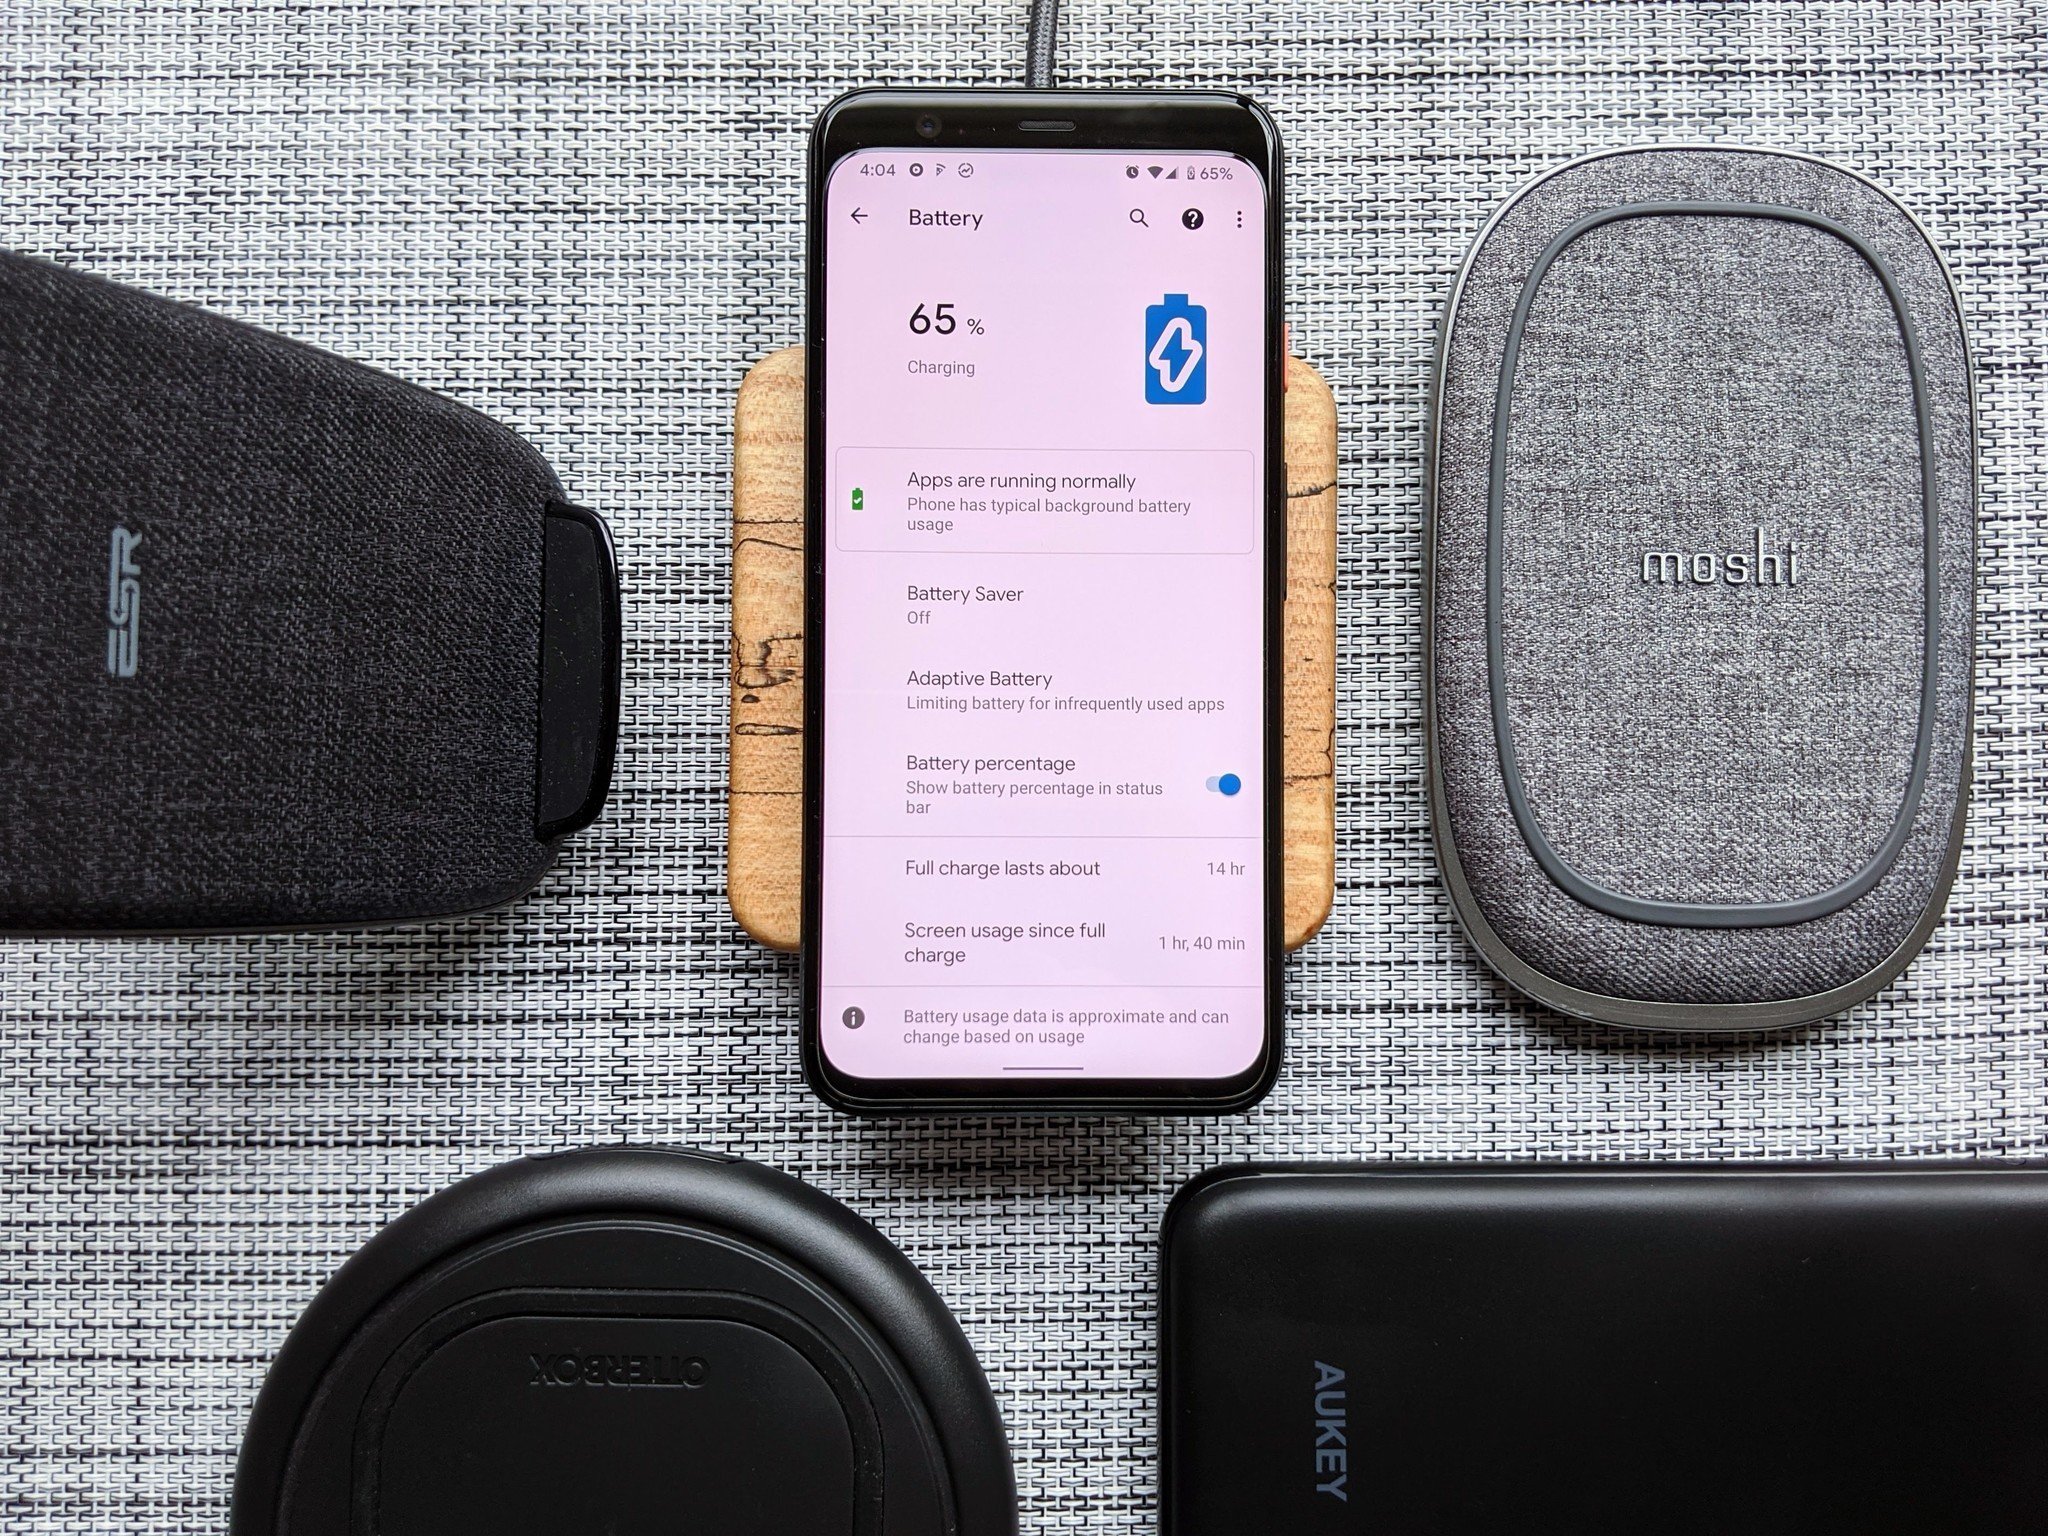 Best wireless charger 2021: Top 12 ranked for Android and iPhone